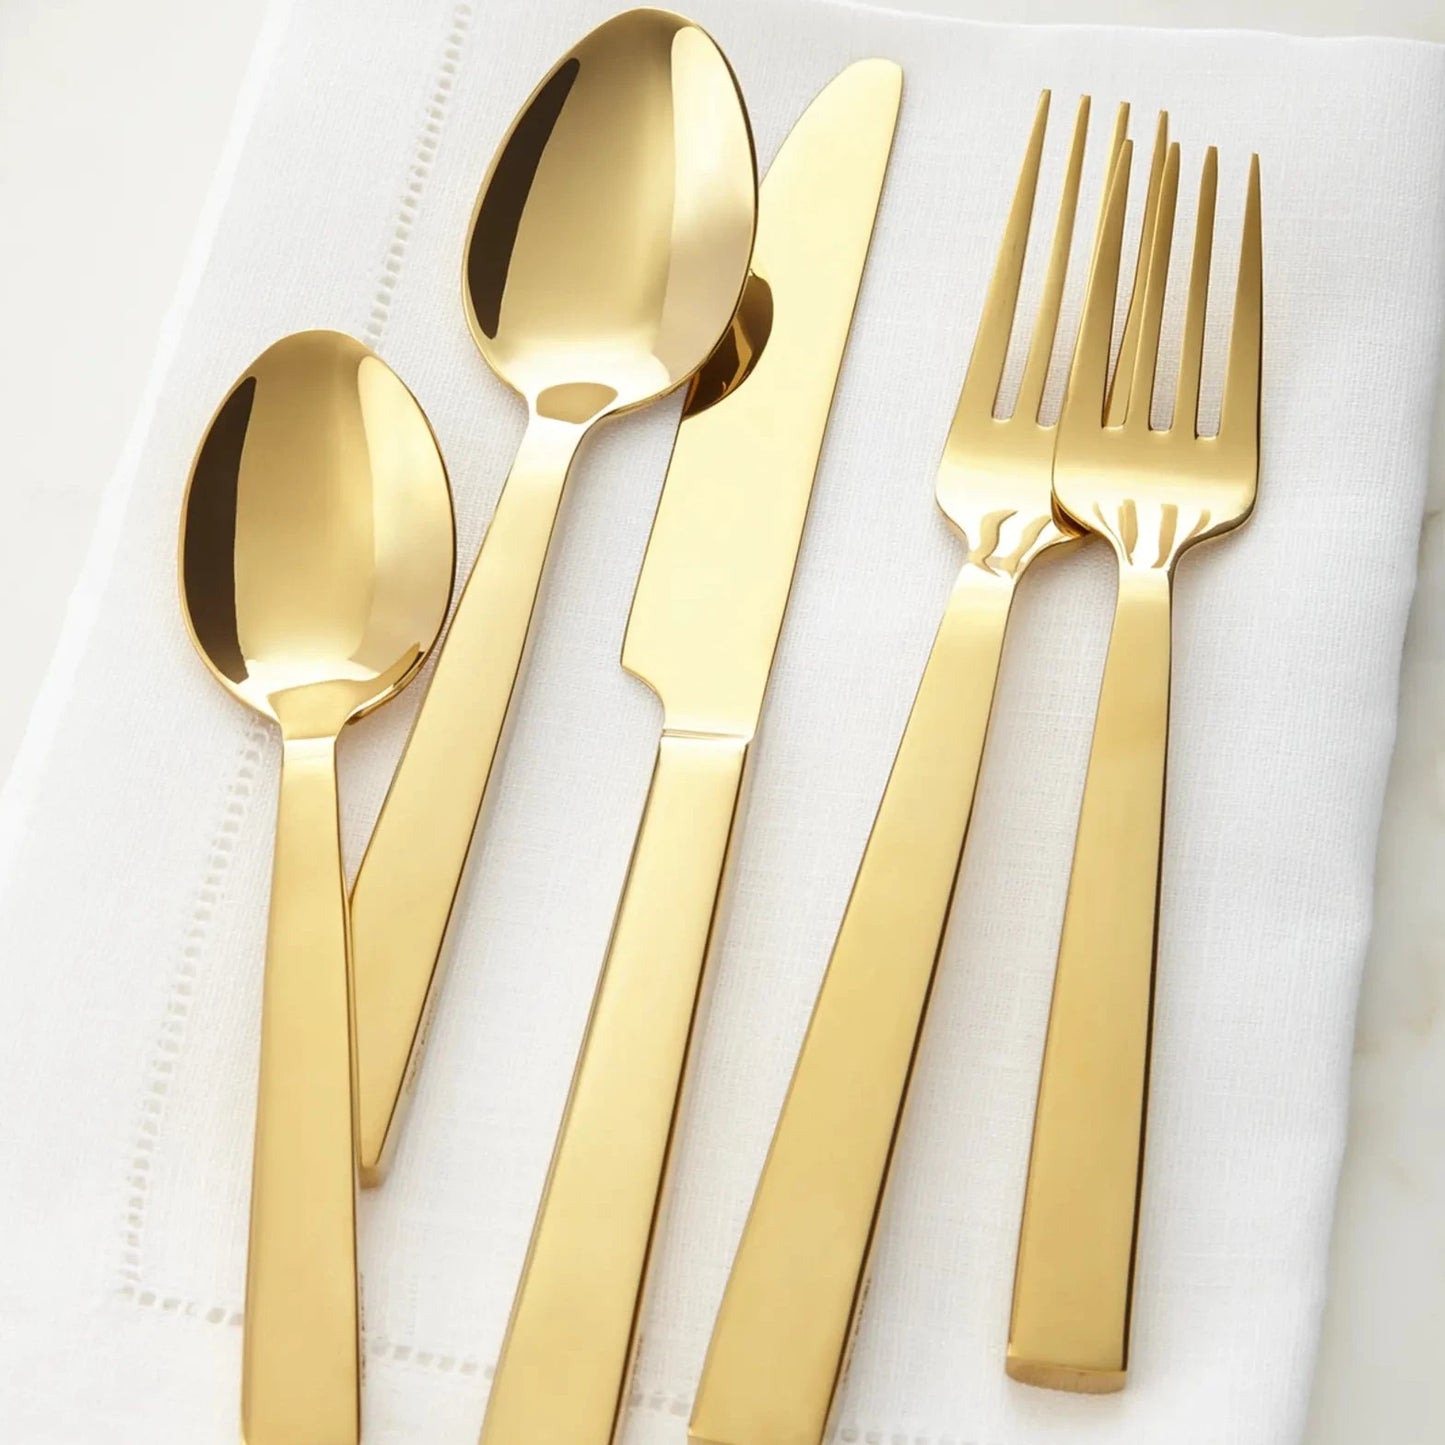 Academy Gold Small Spoons